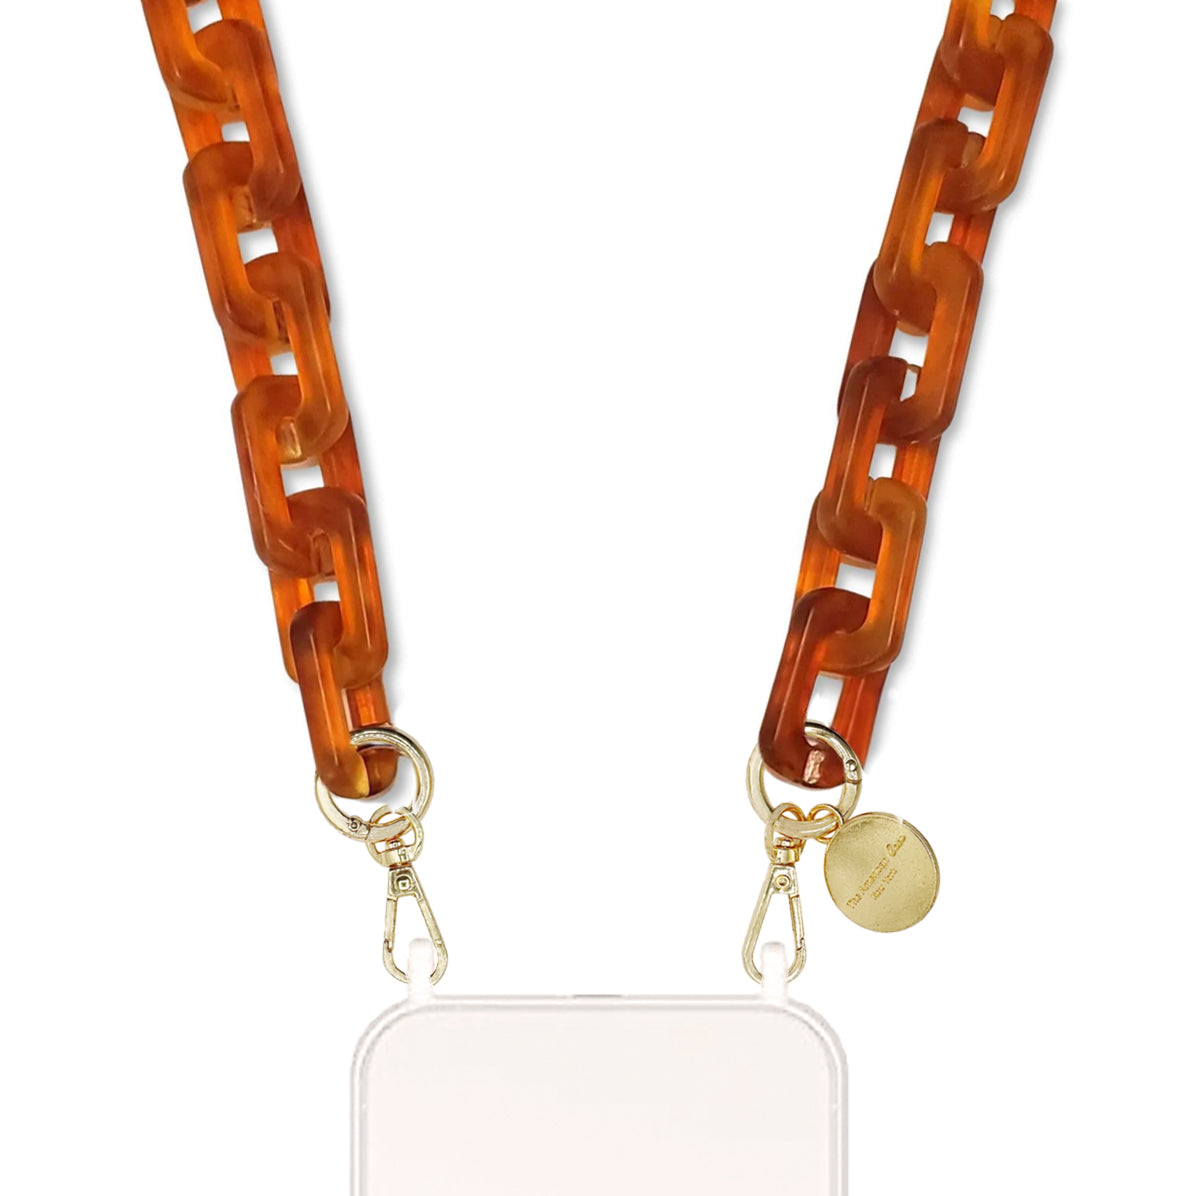 Ruby - Brown Rectangular Resin Chain with Golden Carabiners